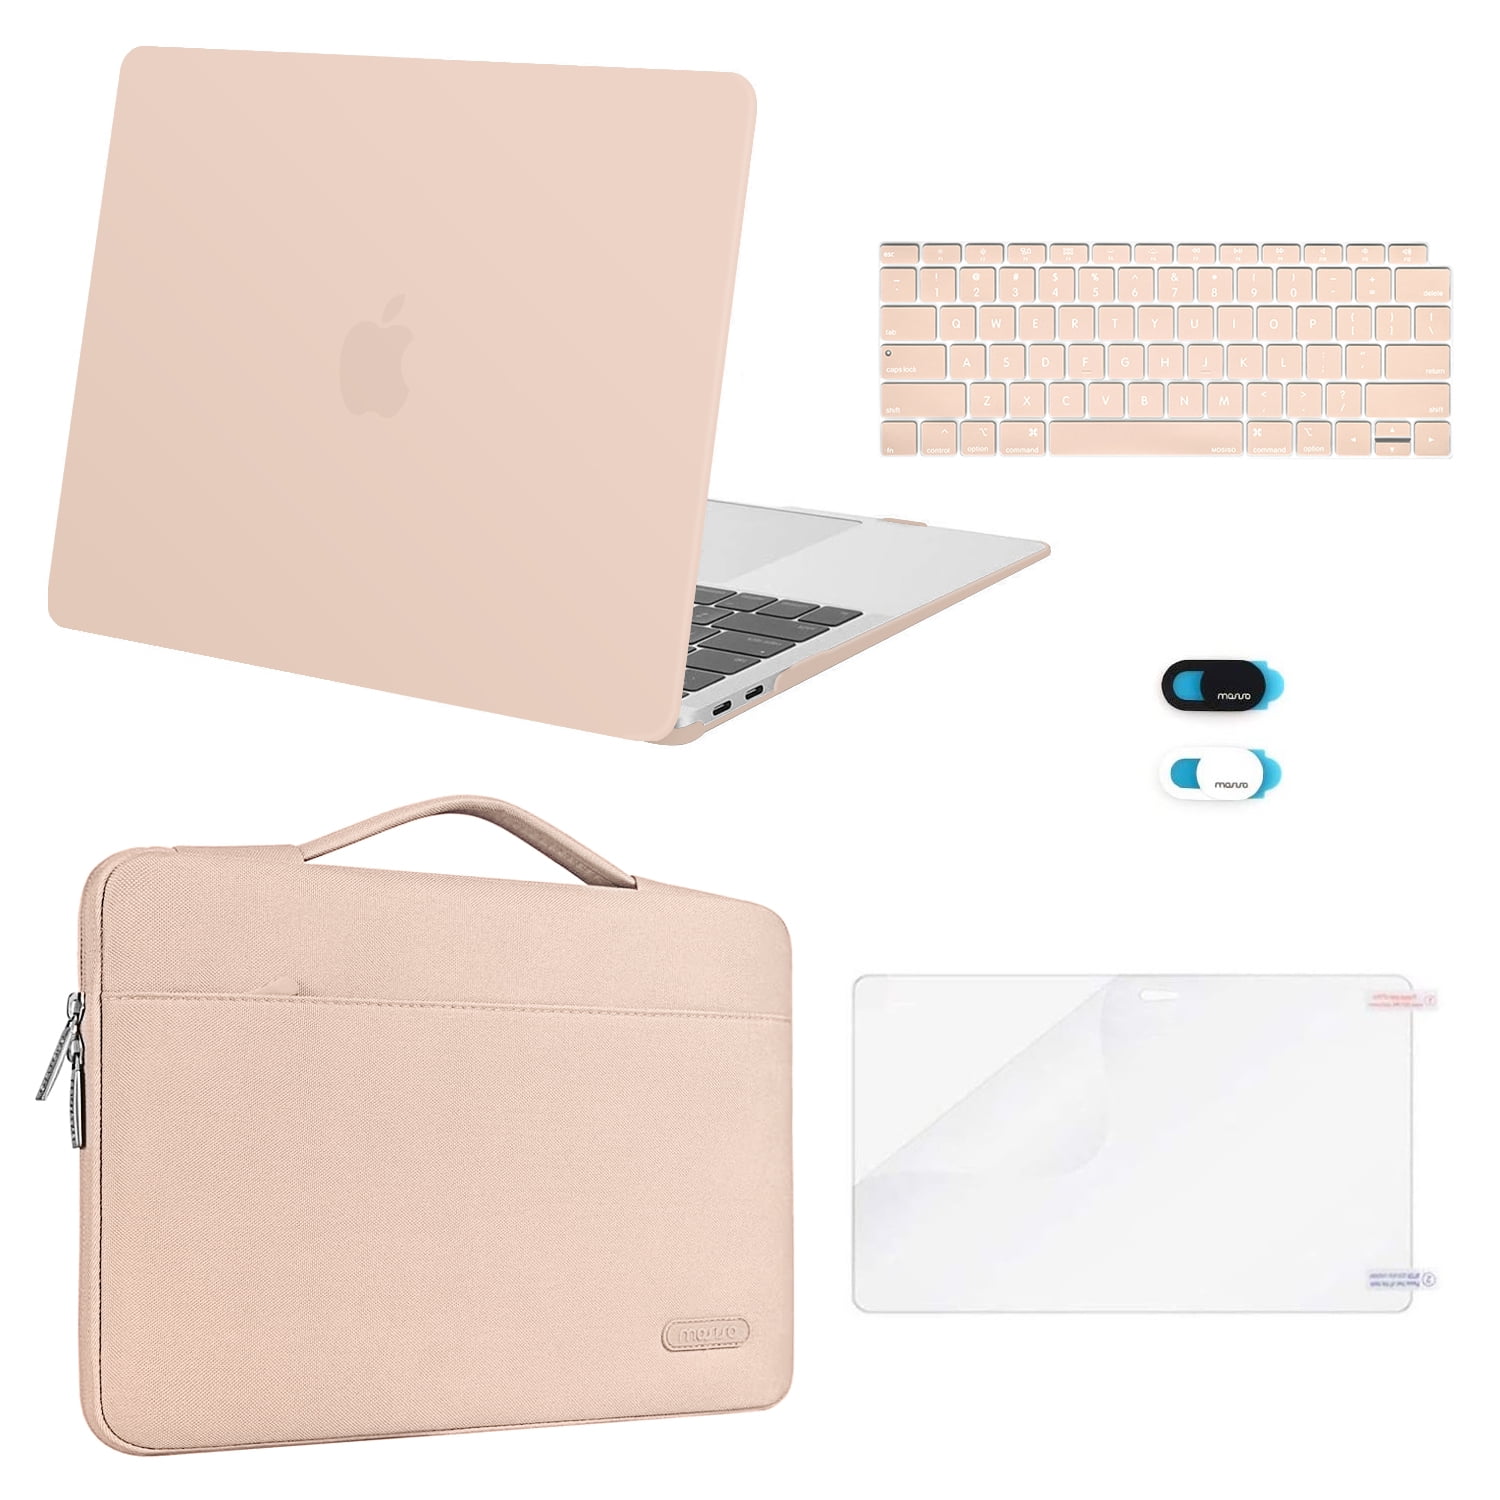 Color : Silver Gold 2018 the case is very fashionable and popular. With the pattern design Laptop protective shell Laptop Metal Style Protective Case for MacBook Air 13.3 inch A1932 